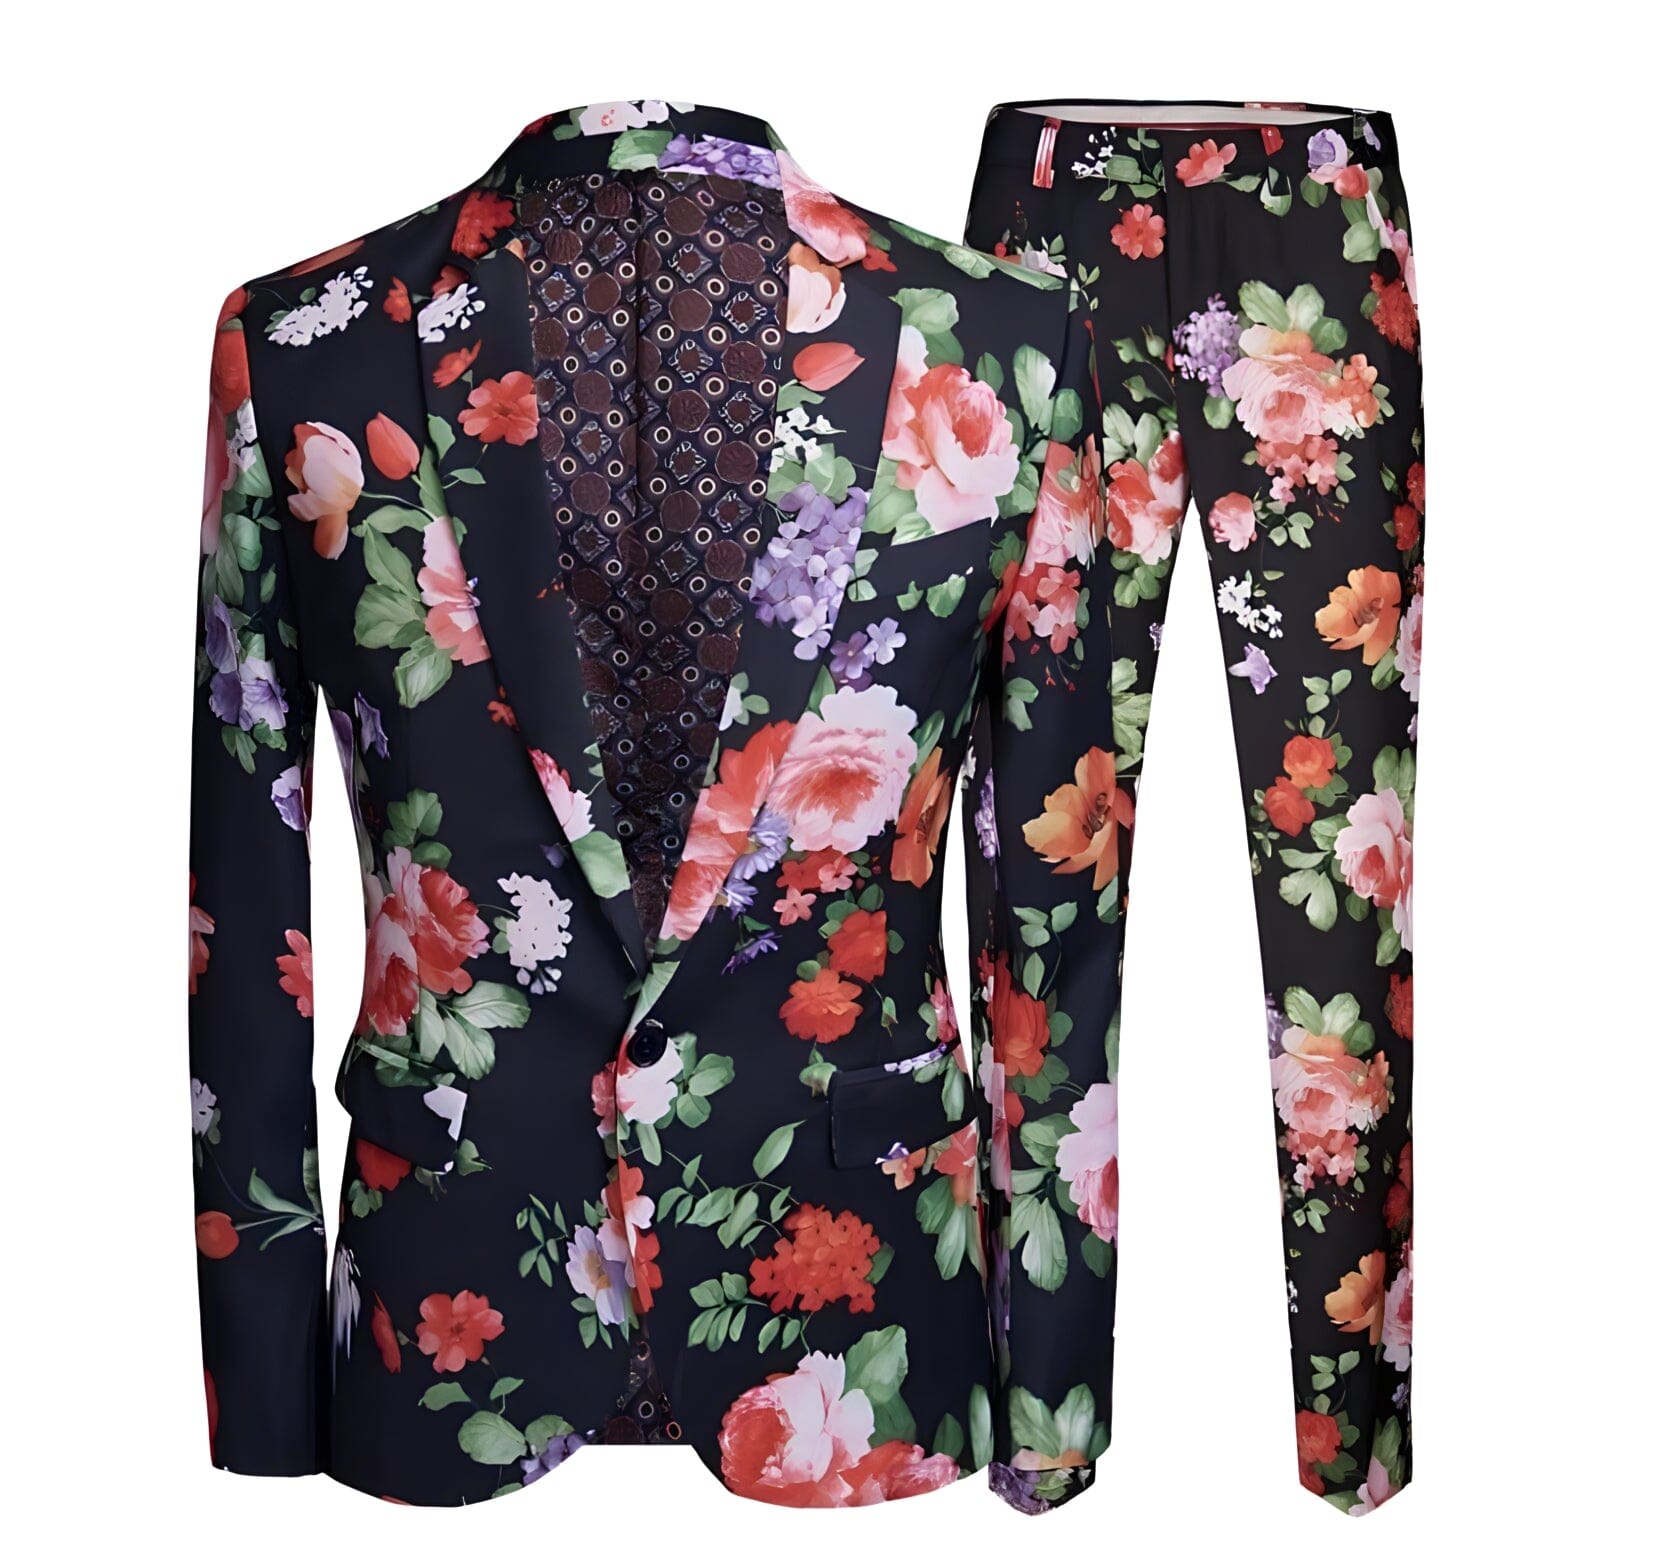 The Blossom Slim Fit Two-Piece Suit Shop5798684 Store XS 